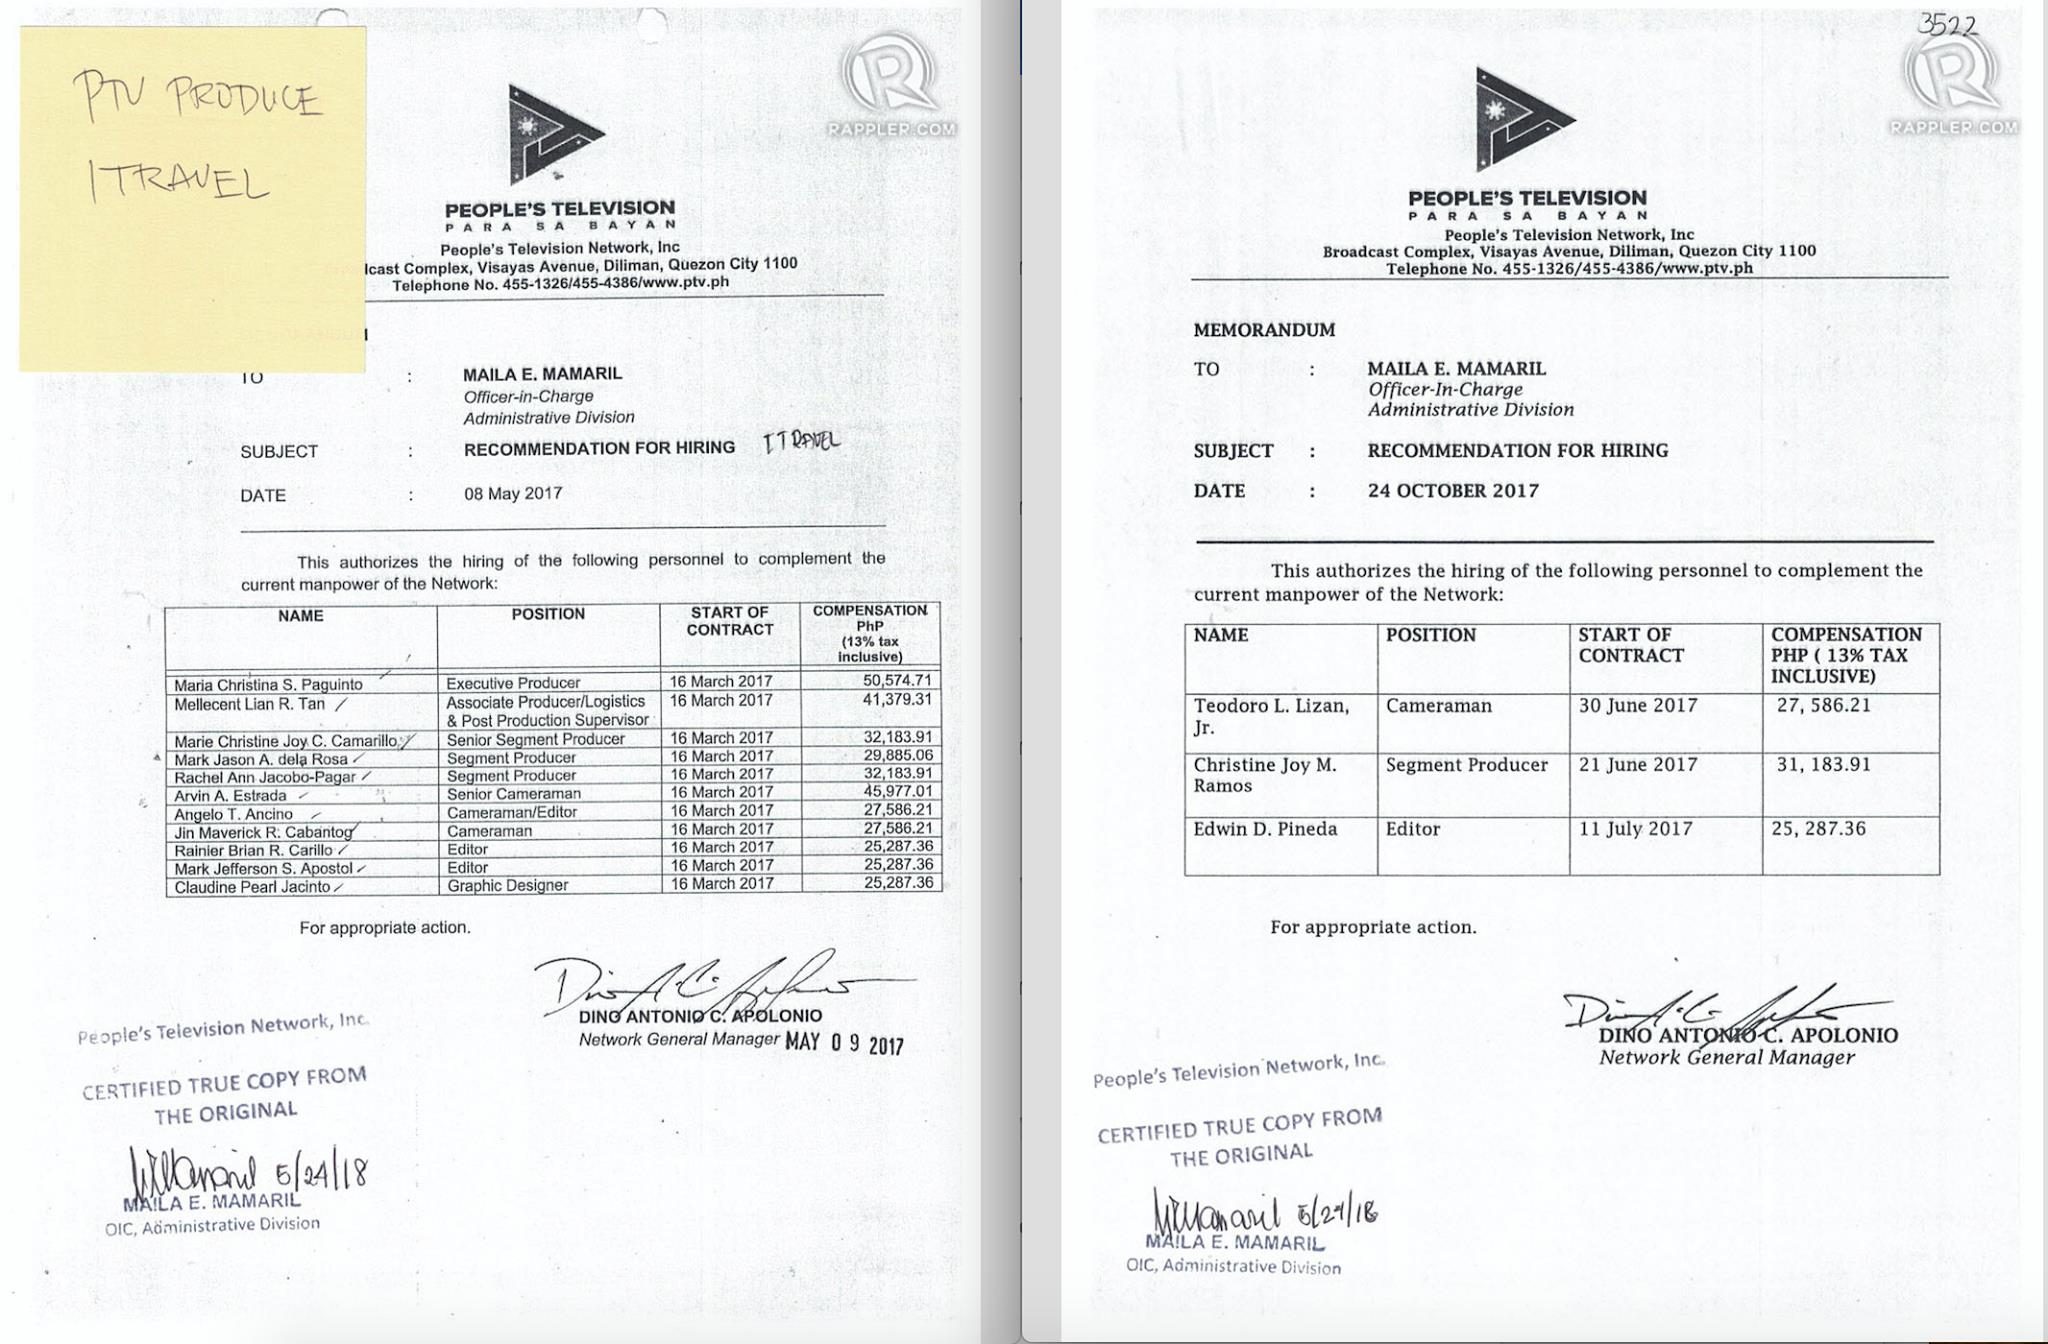 Additional staff hired by PTV for I Travel Pinas. Documents obtained through an FOI request. 